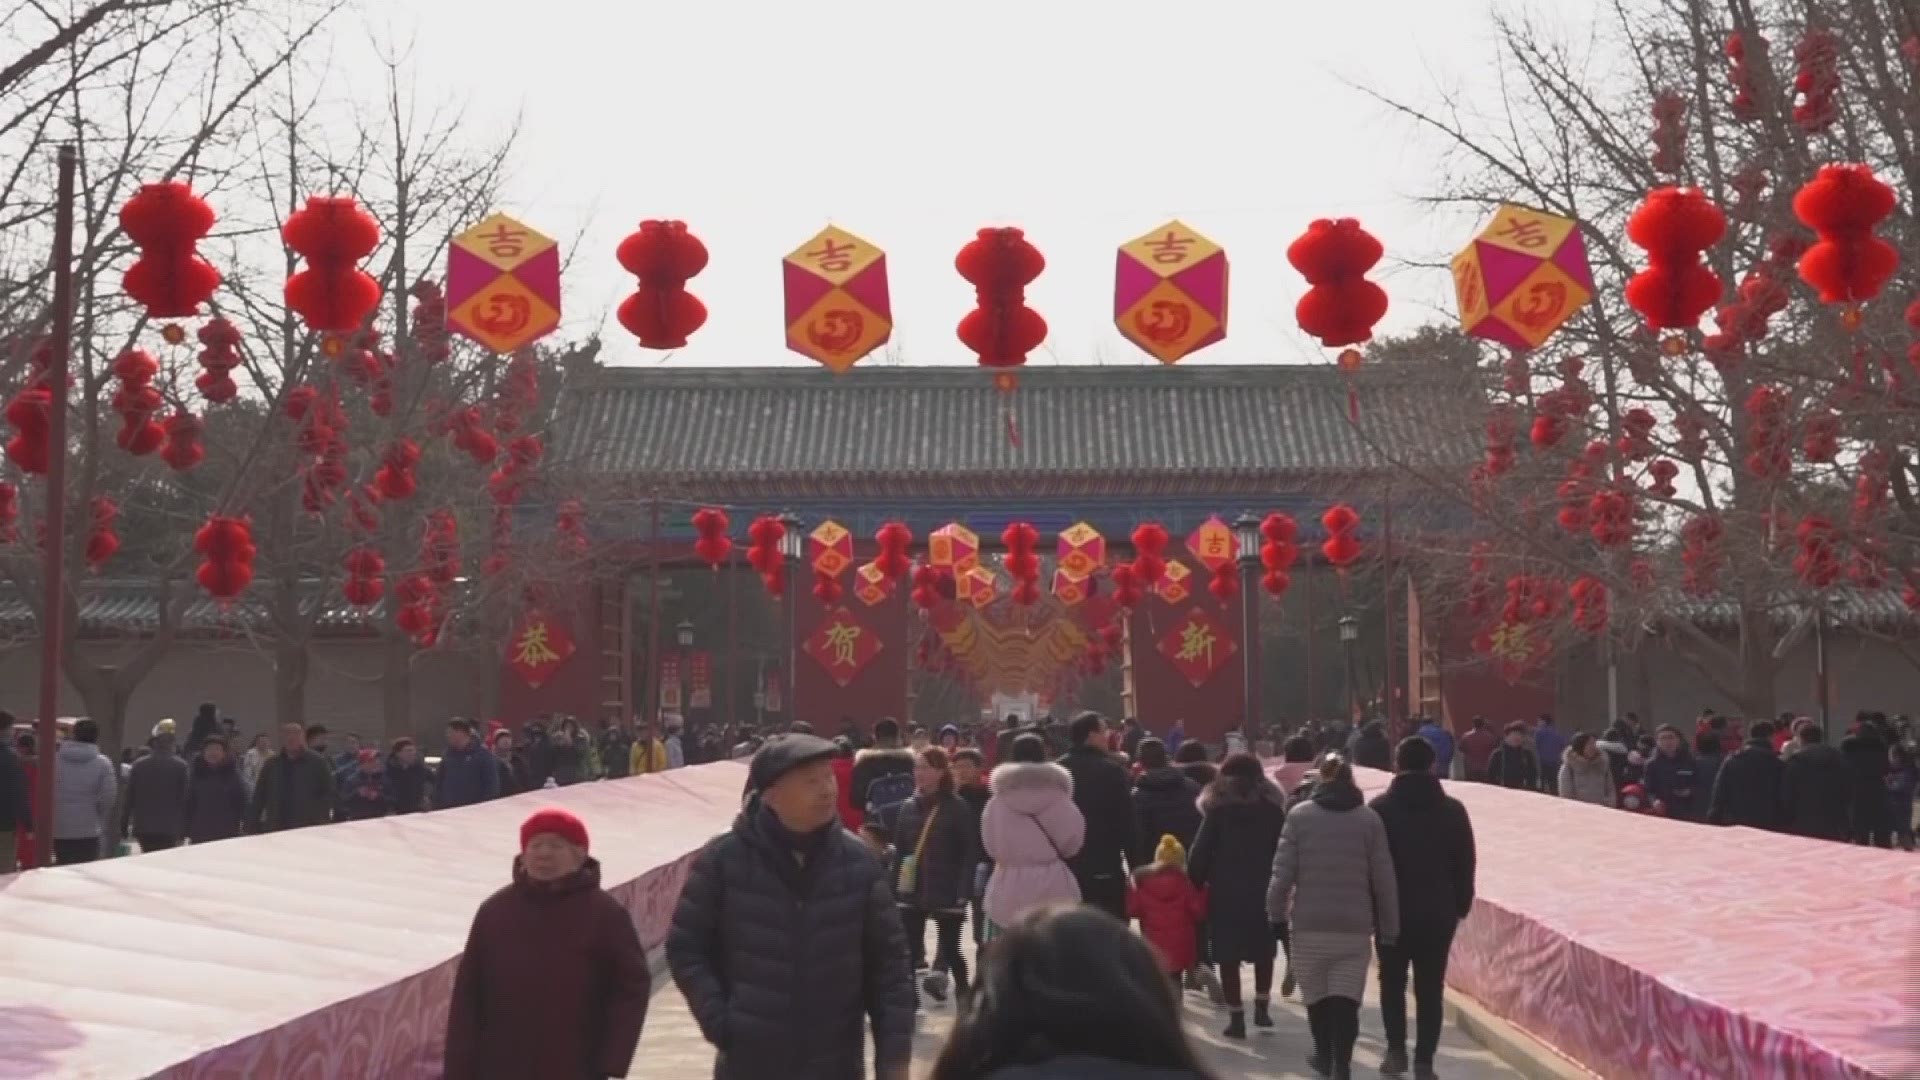 Families celebrated the Year of the Pig with Lunar New Year festivities in China.